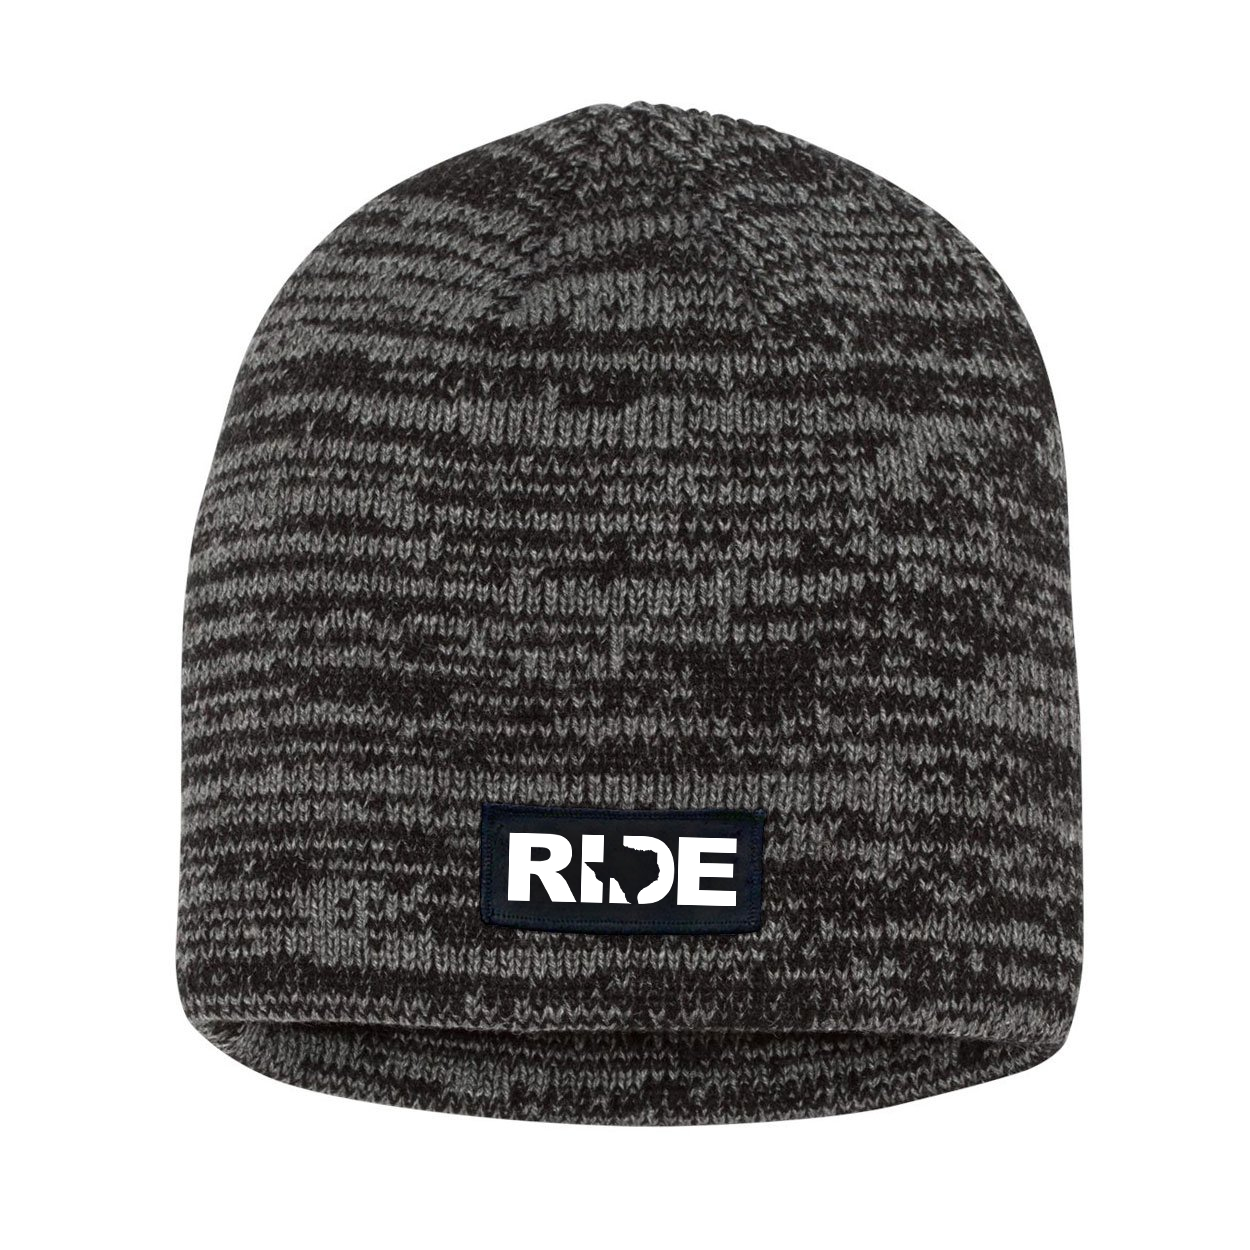 Ride Texas Night Out Woven Patch Skully Marled Knit Beanie Black/Gray (White Logo)